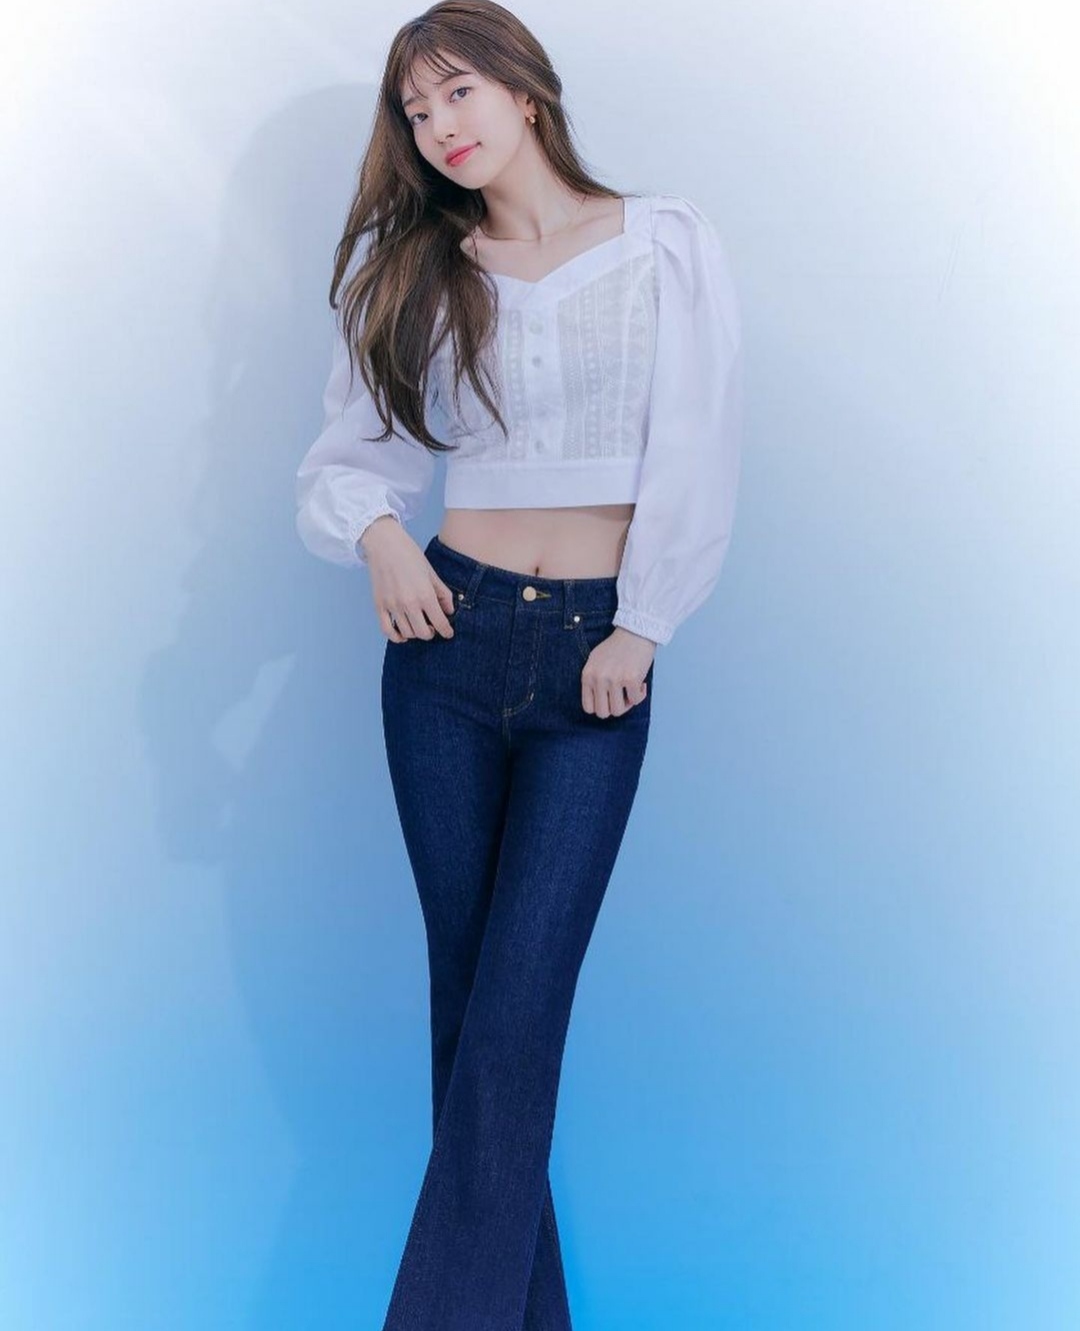 Comfy & Stylish Looks By Bae Suzy: Have A Look